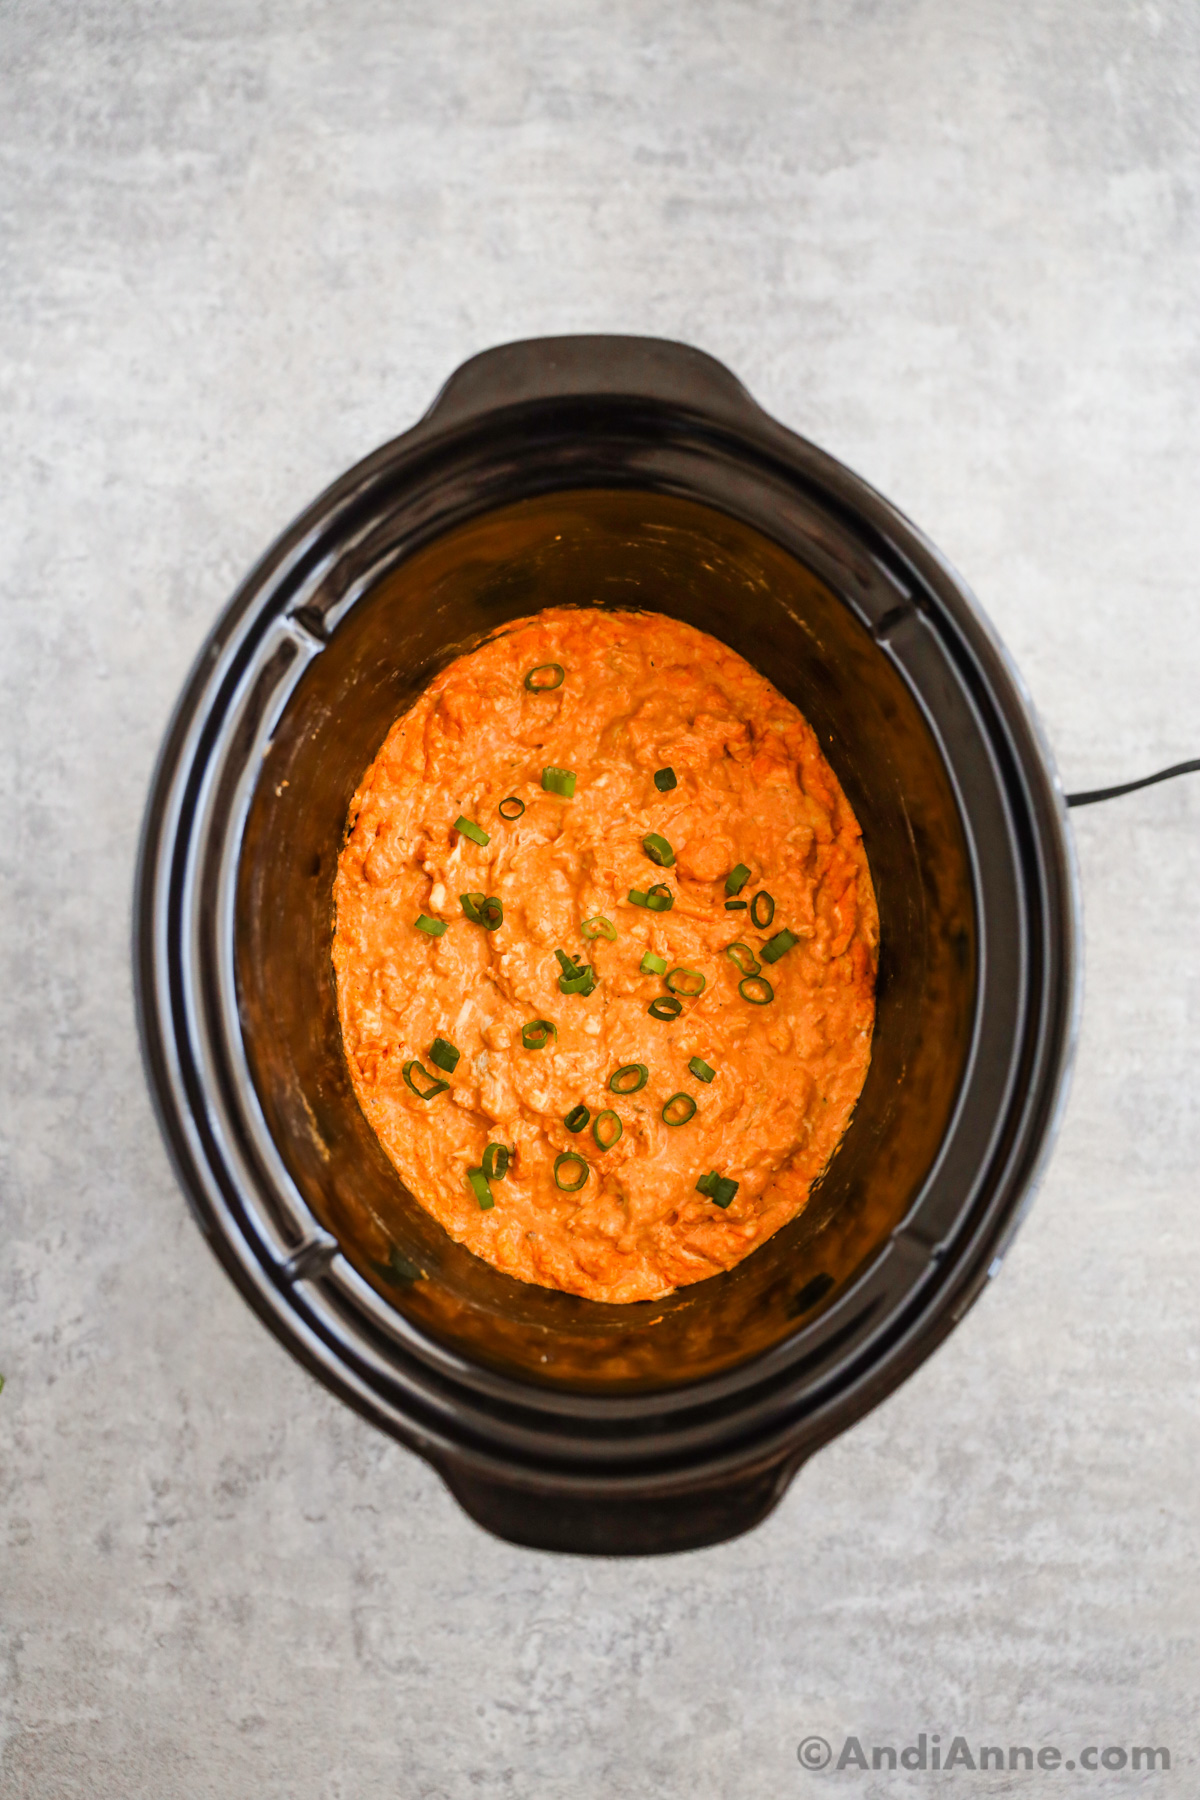 Looking into the slow cooker with buffalo chicken dip inside.